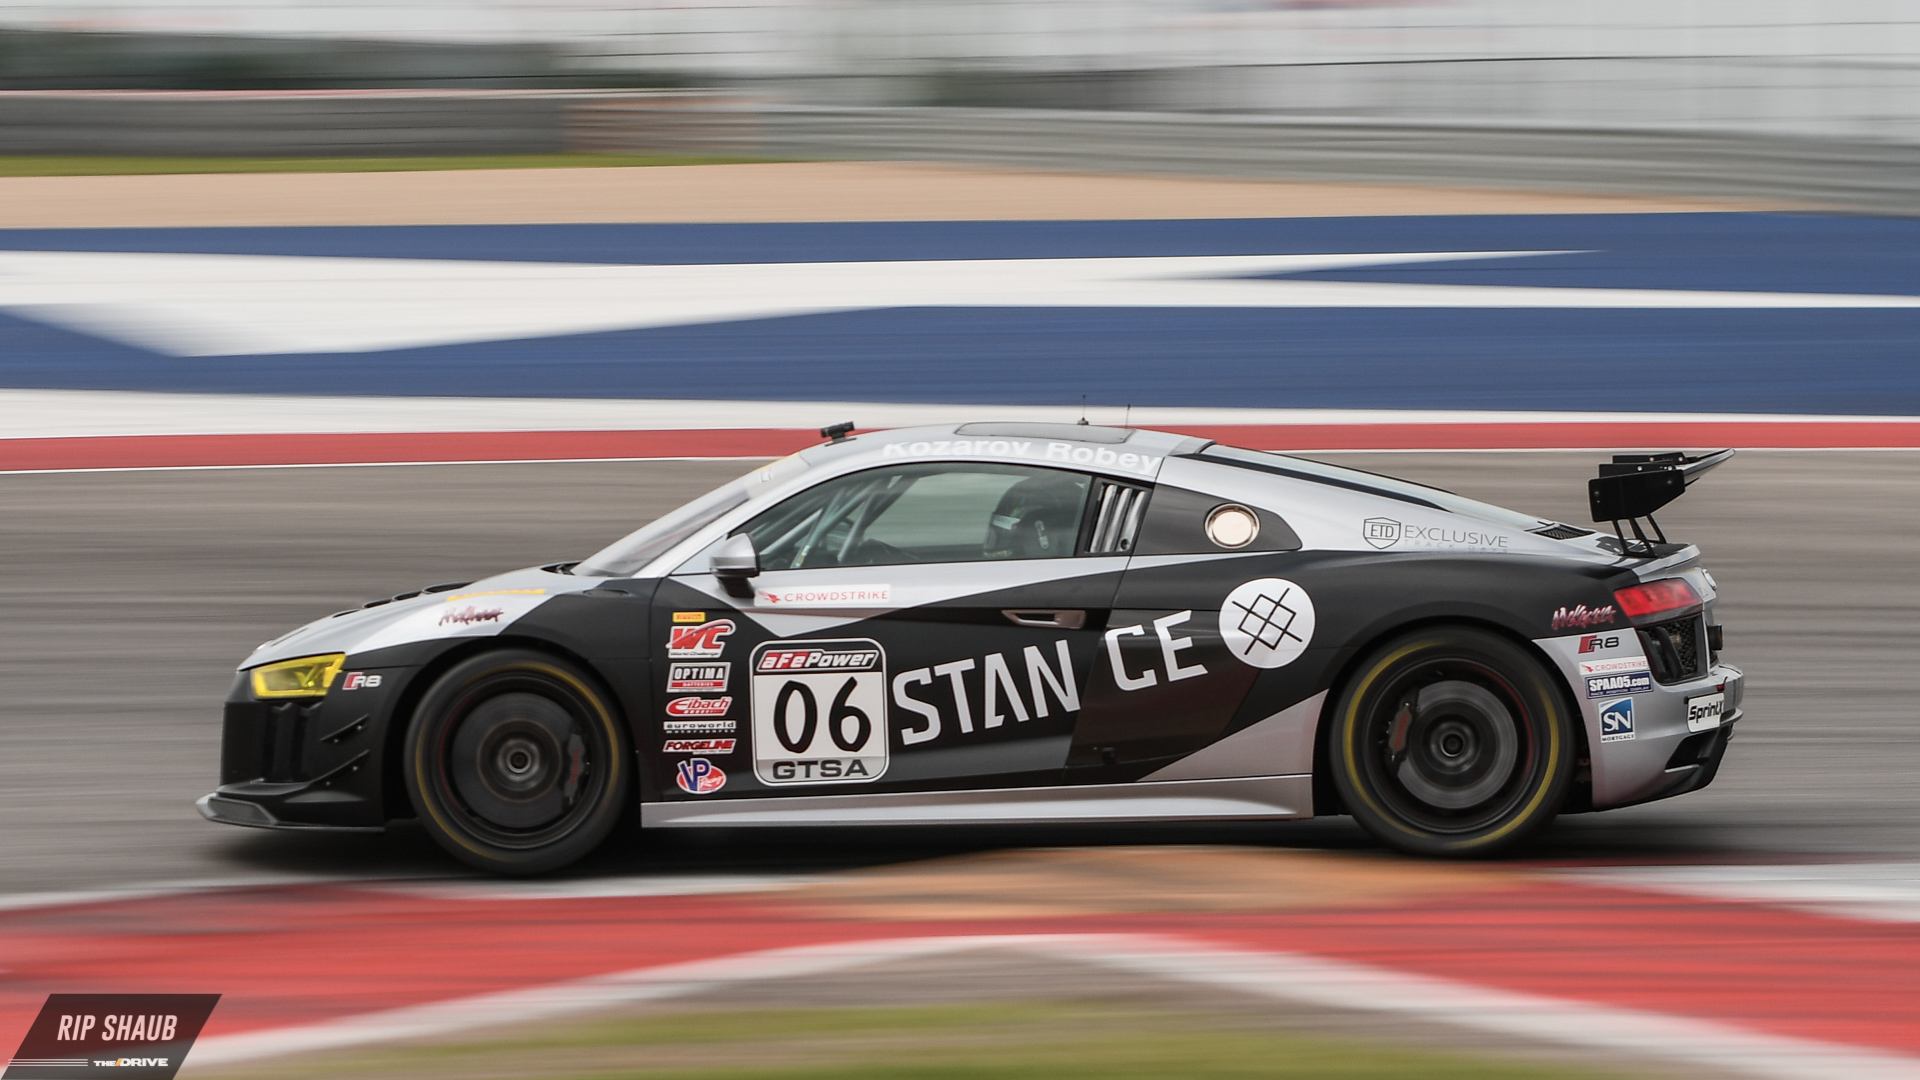 Reardon Racing had a slew of Audis in Austin, including this R* LMS GT4 driven by Vesko Kozarov and Ace Robey., <i>© Rip Shaub - All Rights Reserved</i>